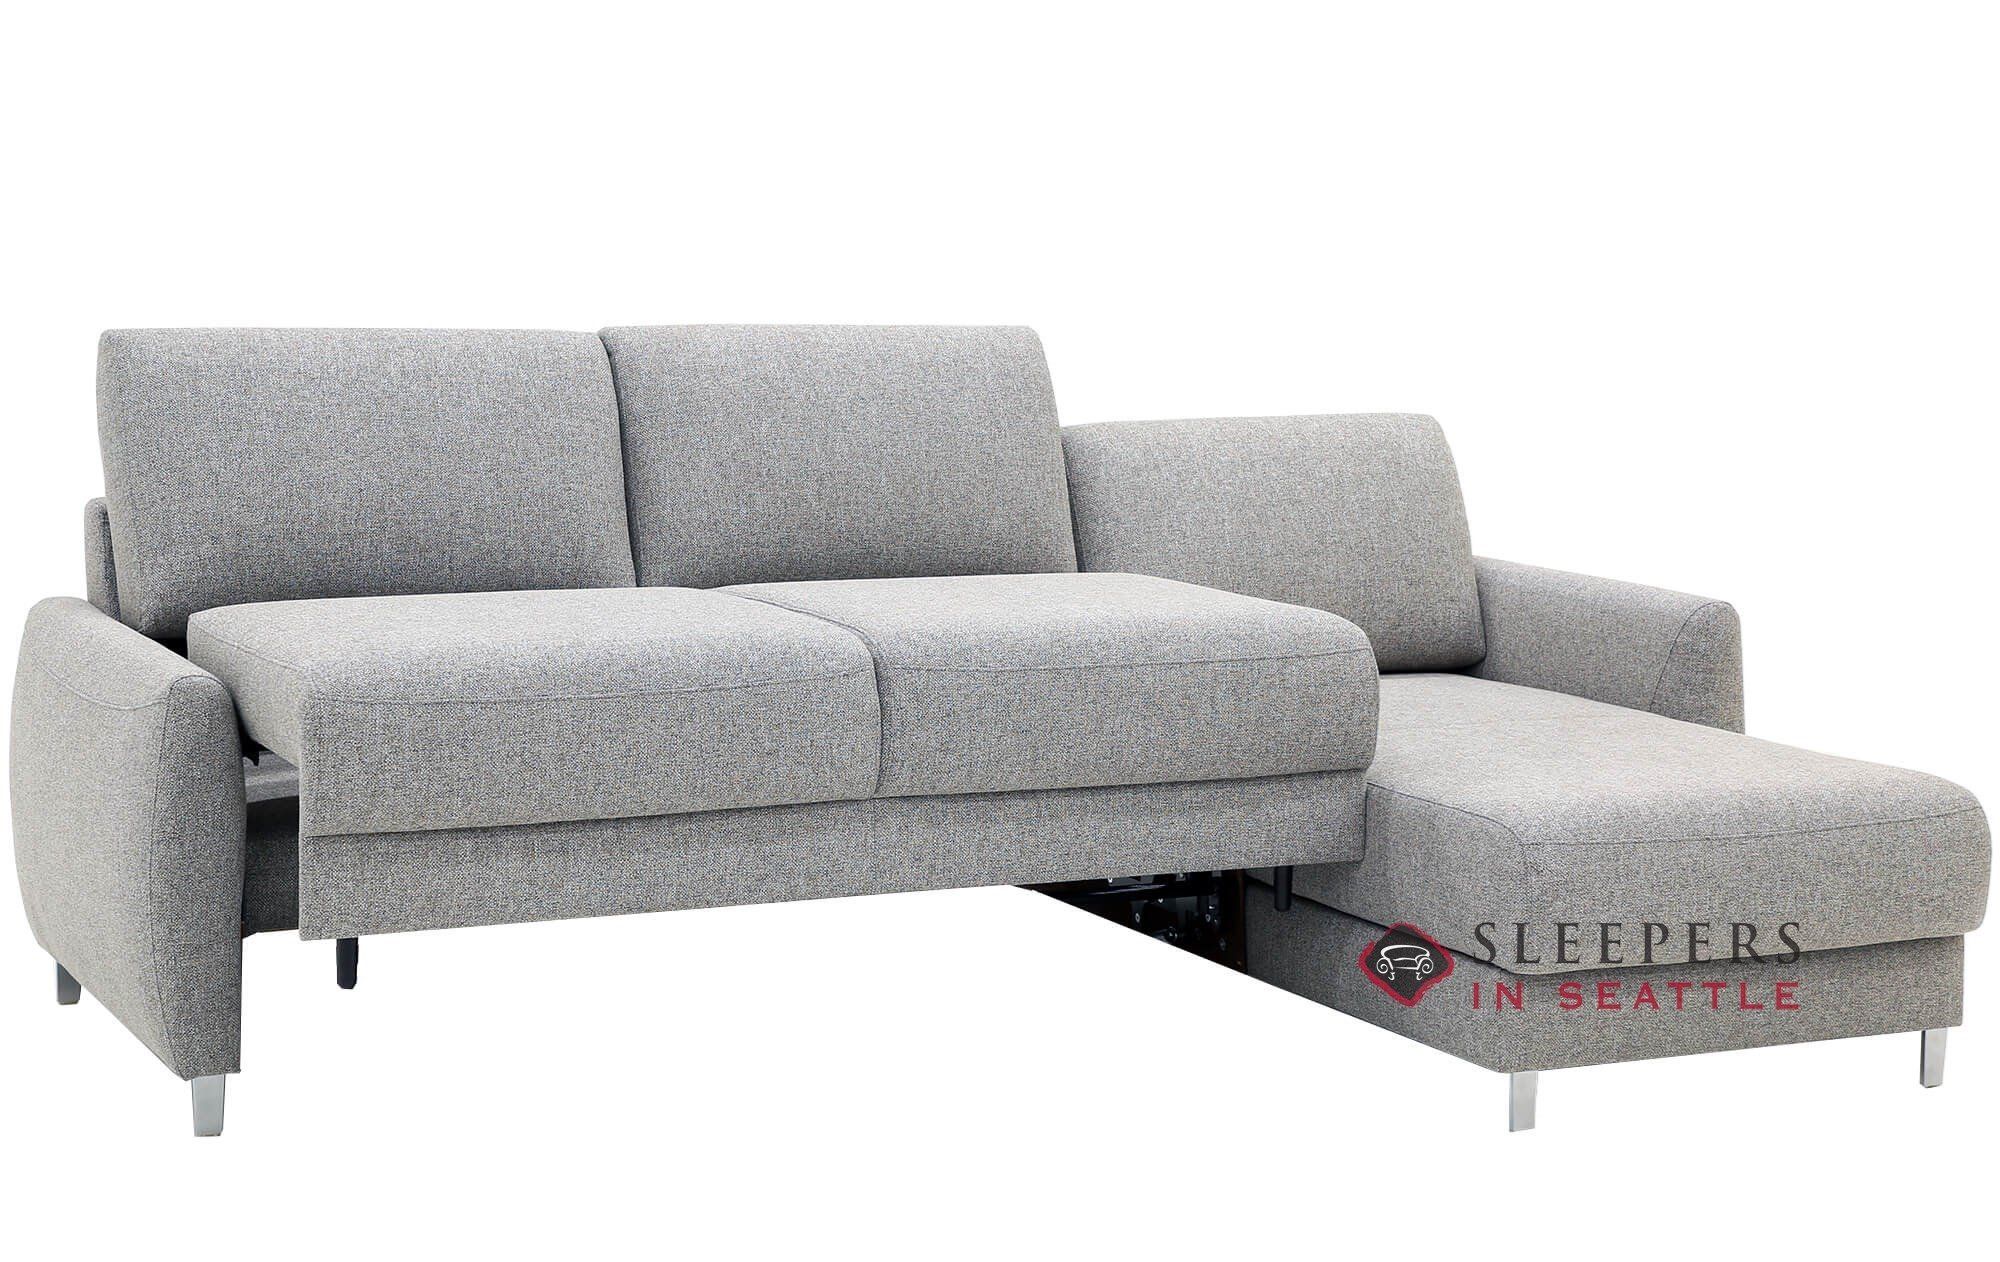 Customize And Personalize Delta Chaise Sectional Fabric Sofaluonto |  Chaise Sectional Size Sofa Bed | Sleepersinseattle Inside Convertible Sofa With Matching Chaise (View 4 of 15)